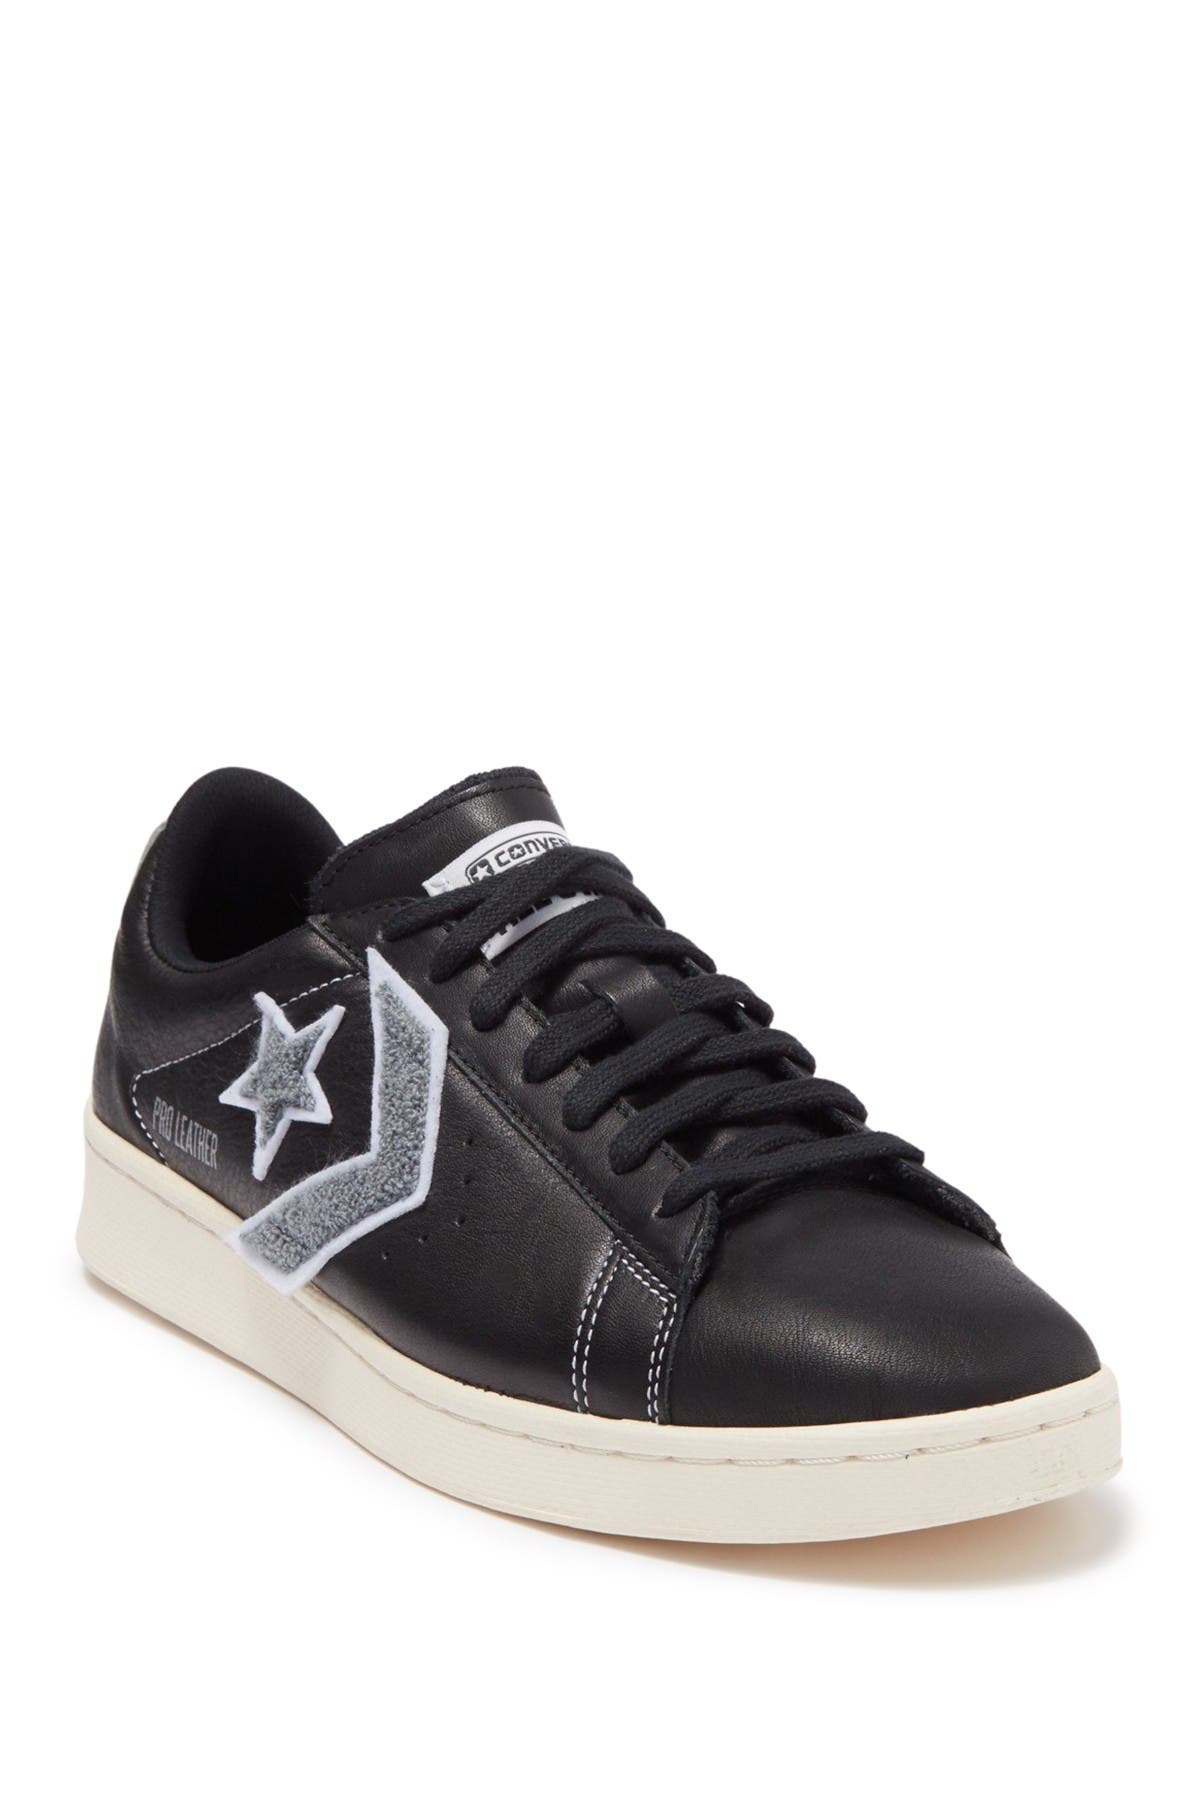 Converse | Pro Leather Oxford Sneaker | Nordstrom Rack